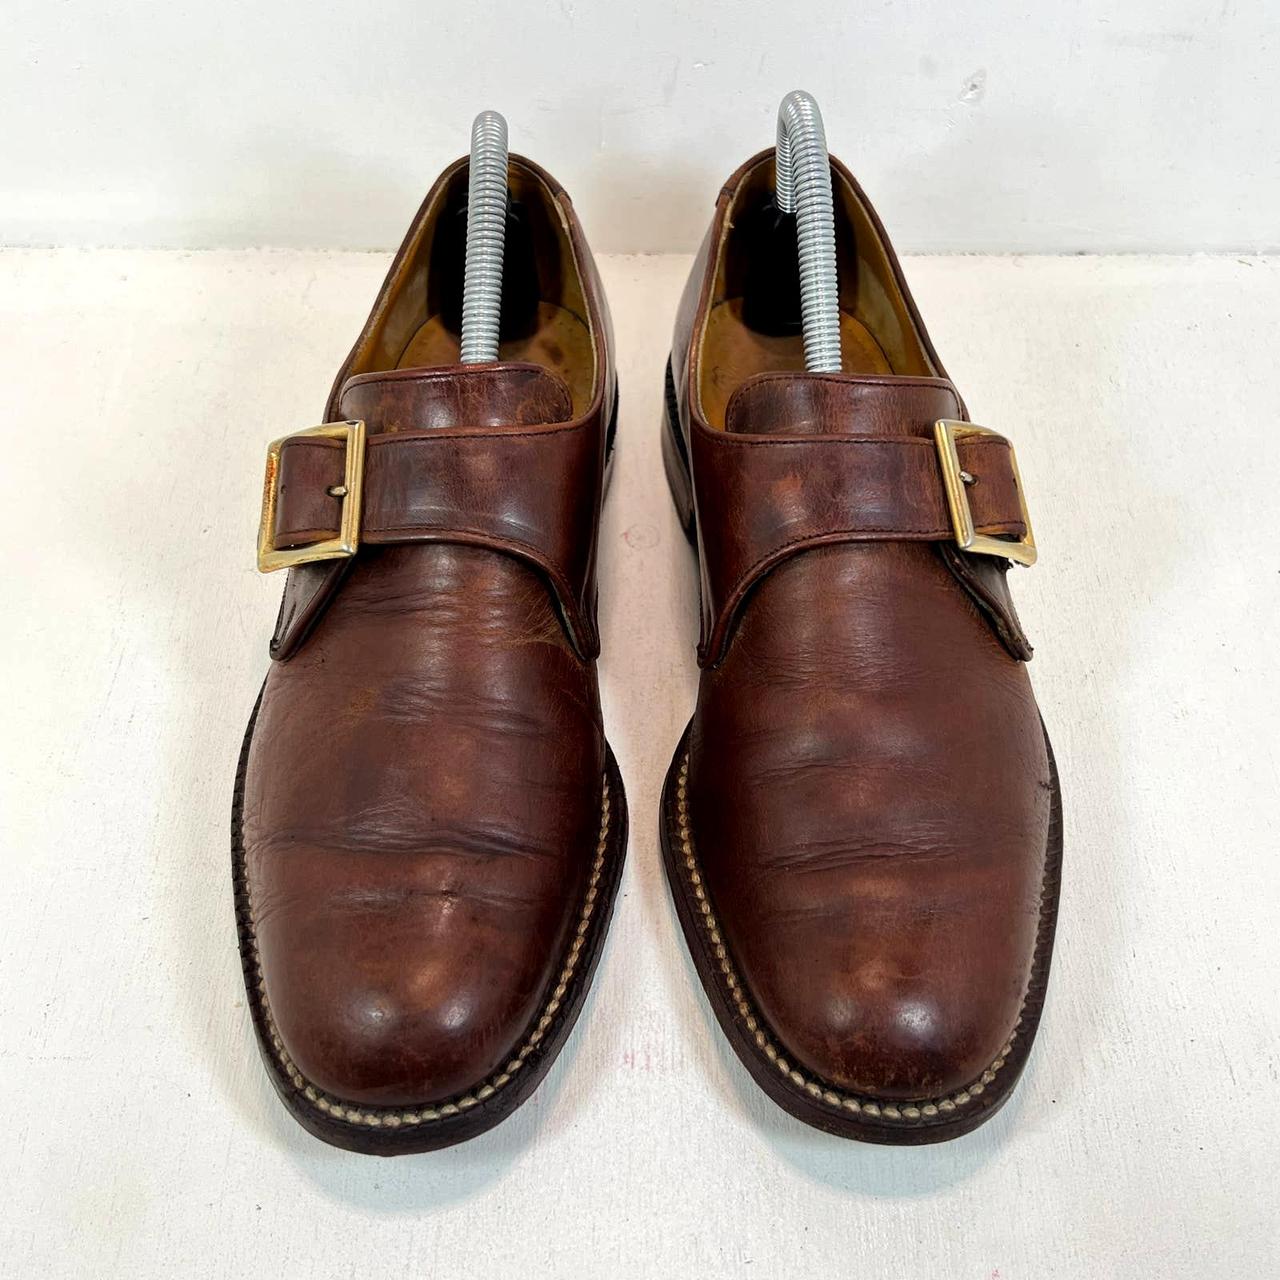 Grenson Men's Brown and Gold Loafers | Depop